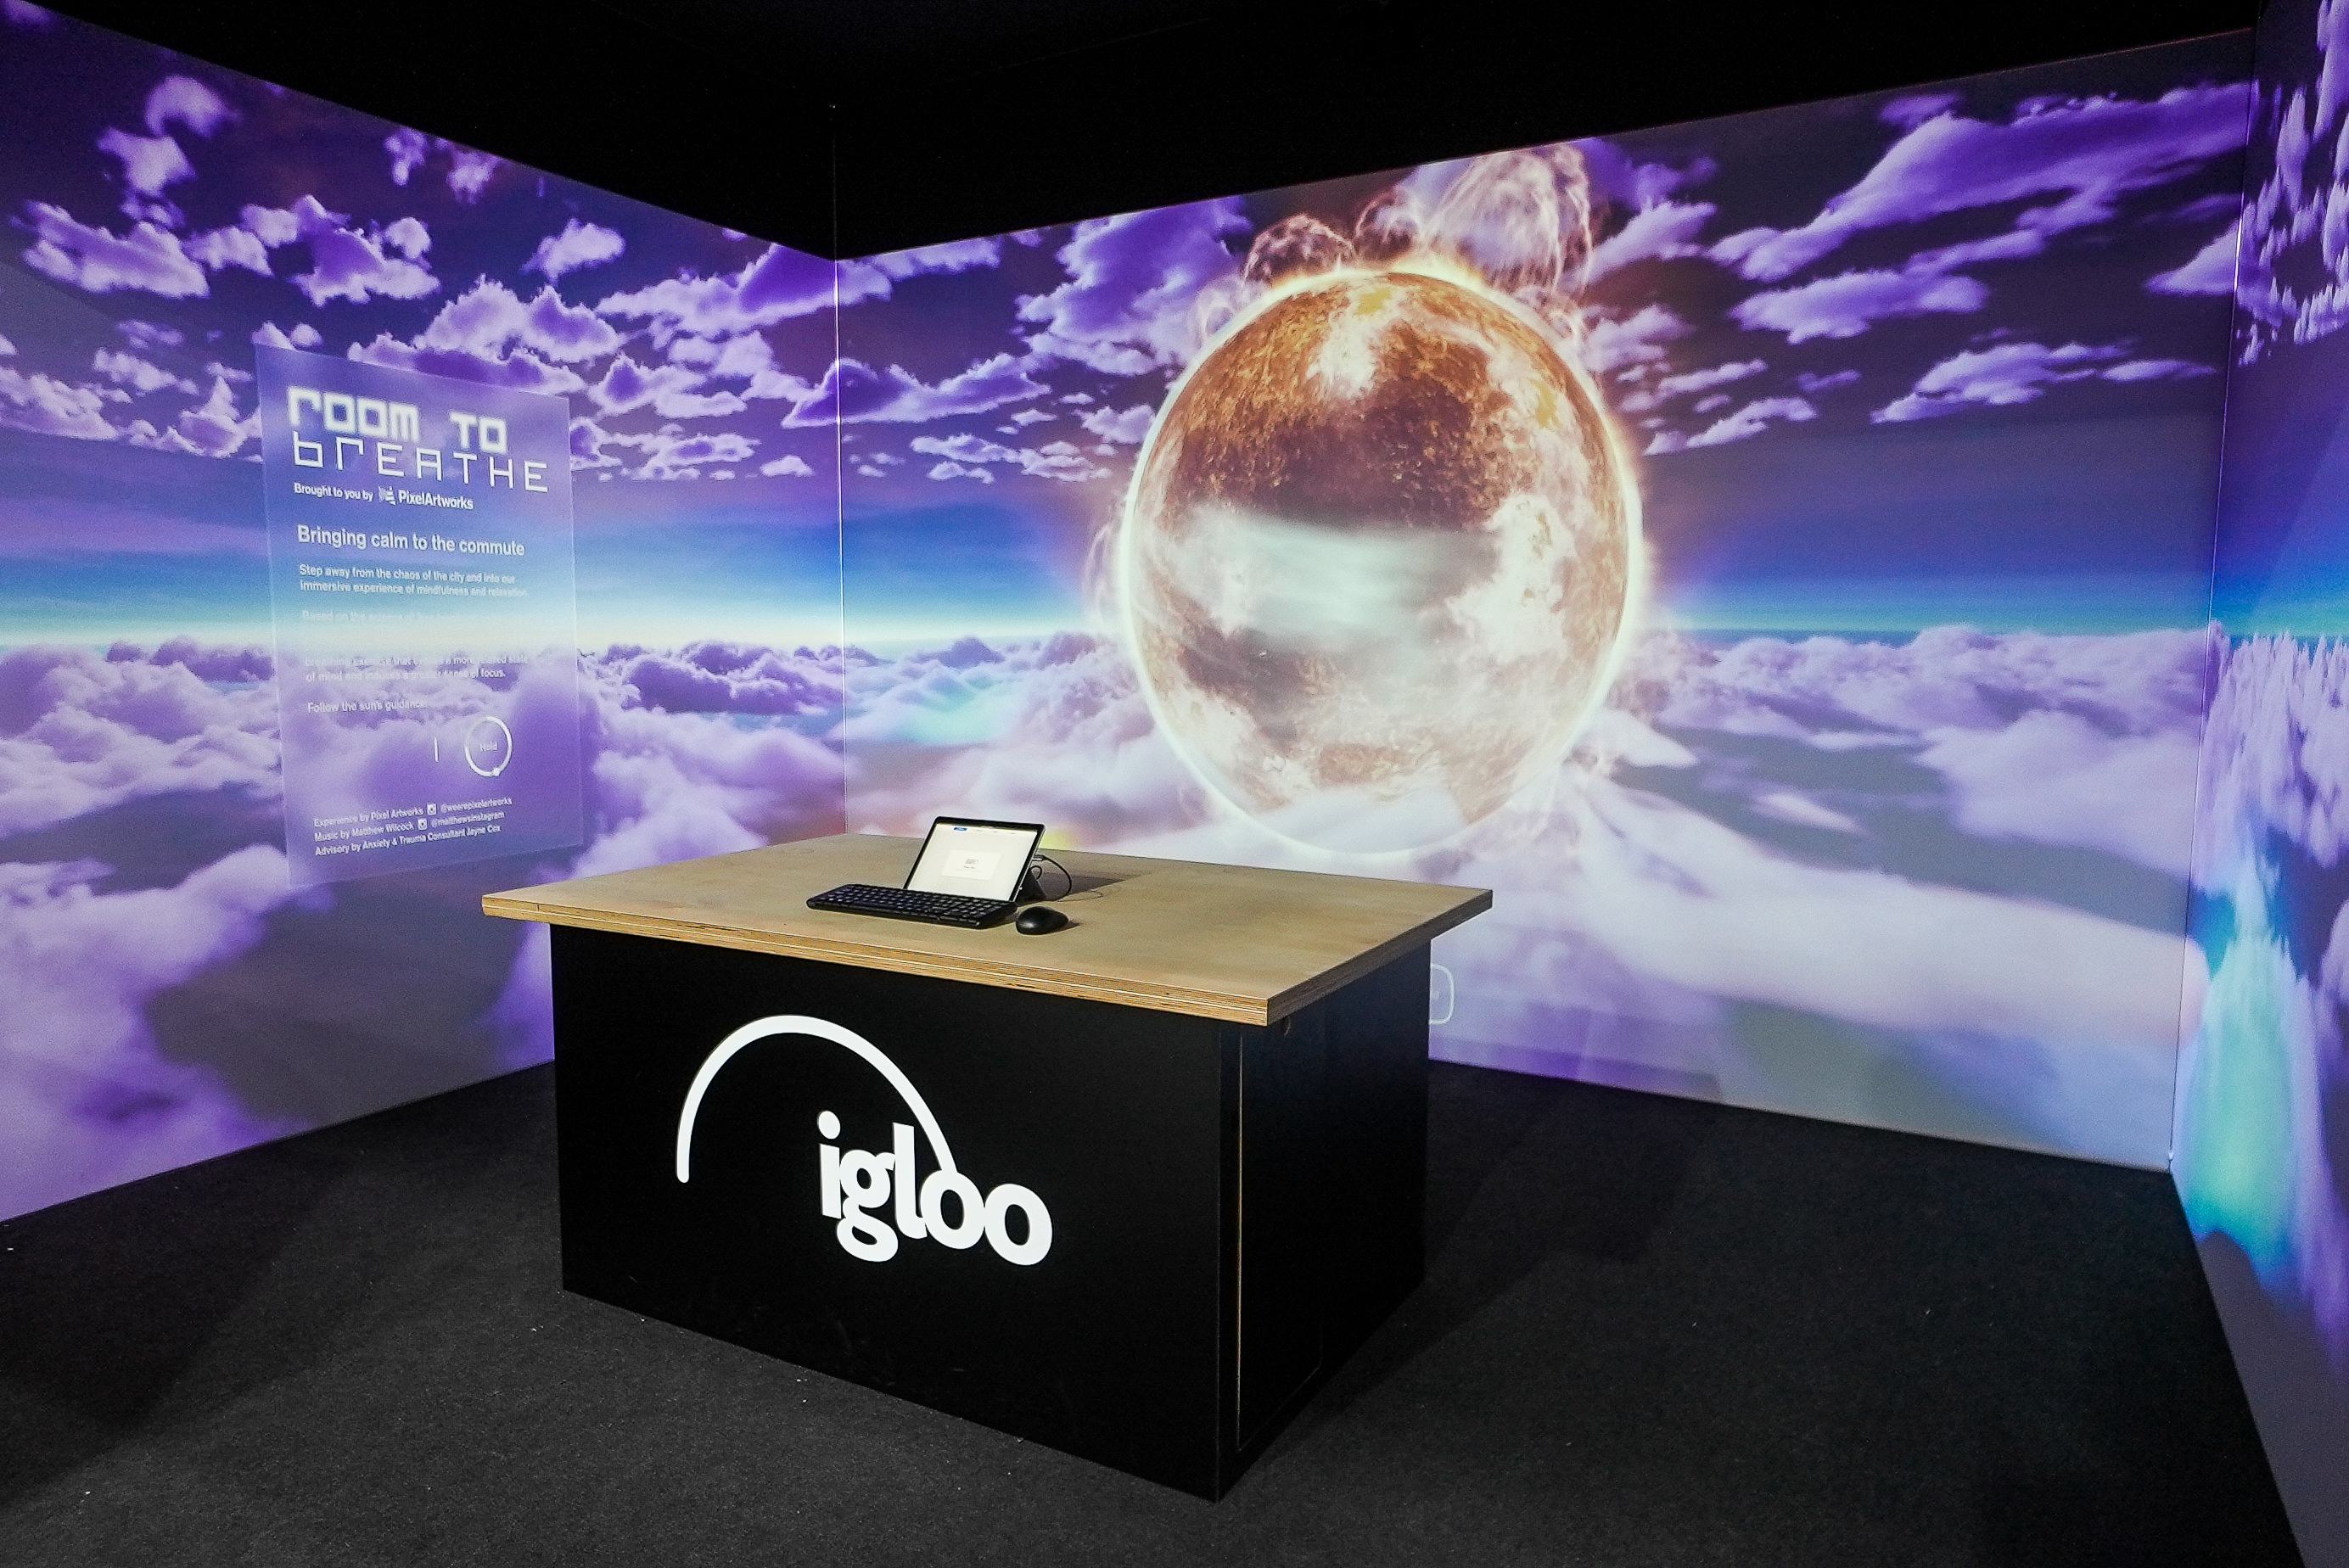 Igloo desk set up with images of the sky on the screens behind a desk